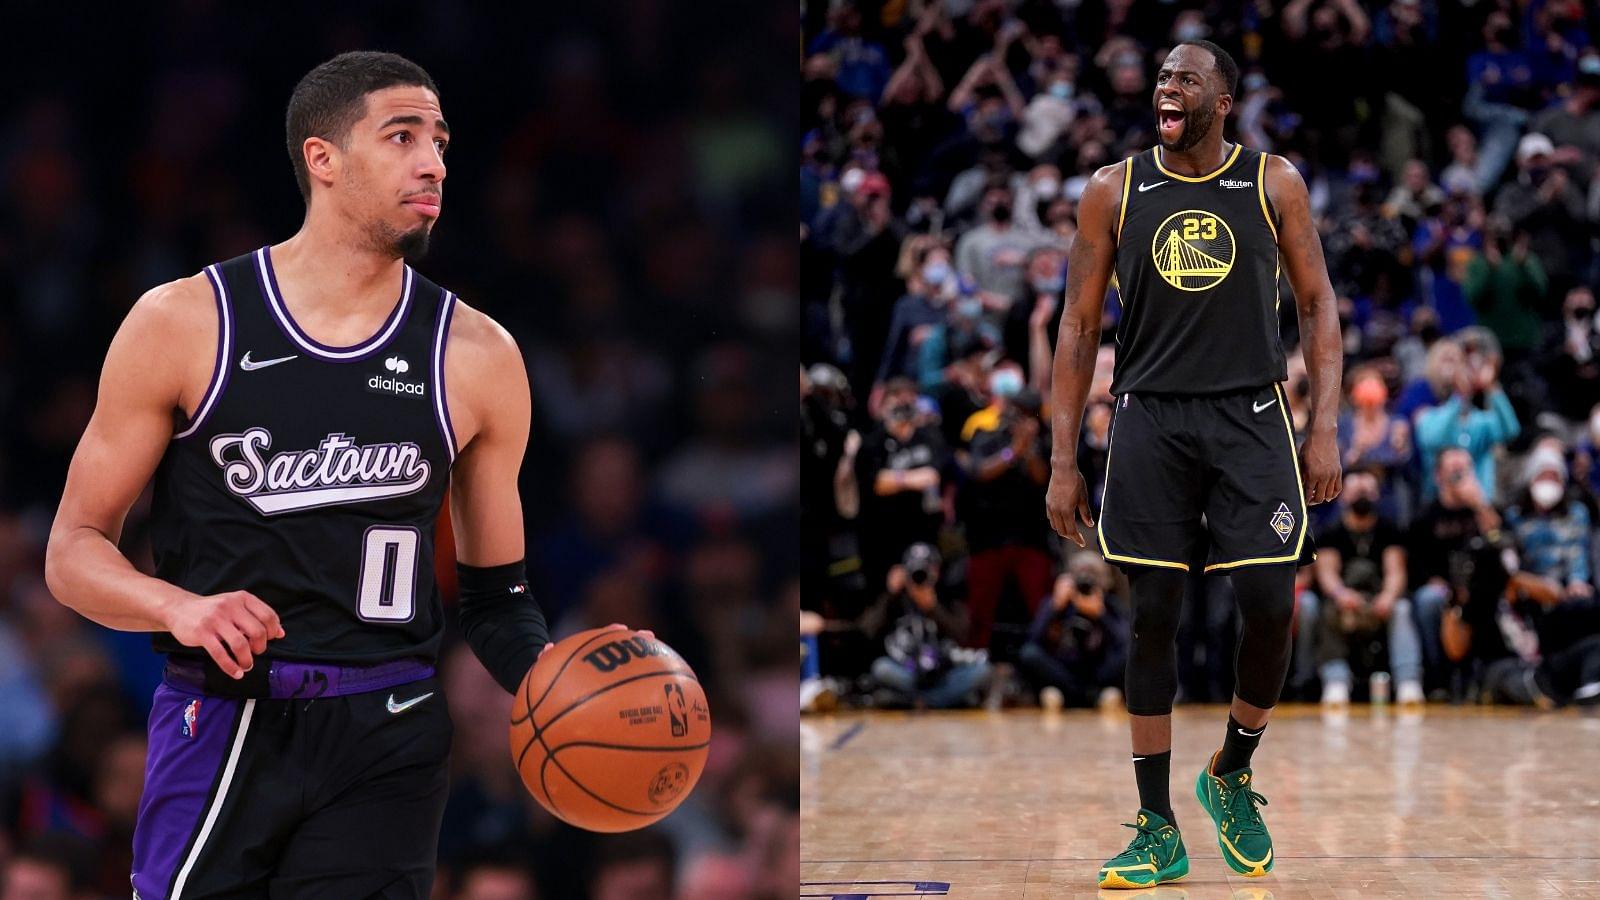 "I was shocked!!! I just could not foresee Kings trading Tyrese Haliburton": Draymond Green expressed his disbelief as Sacramento traded away their promising young guard